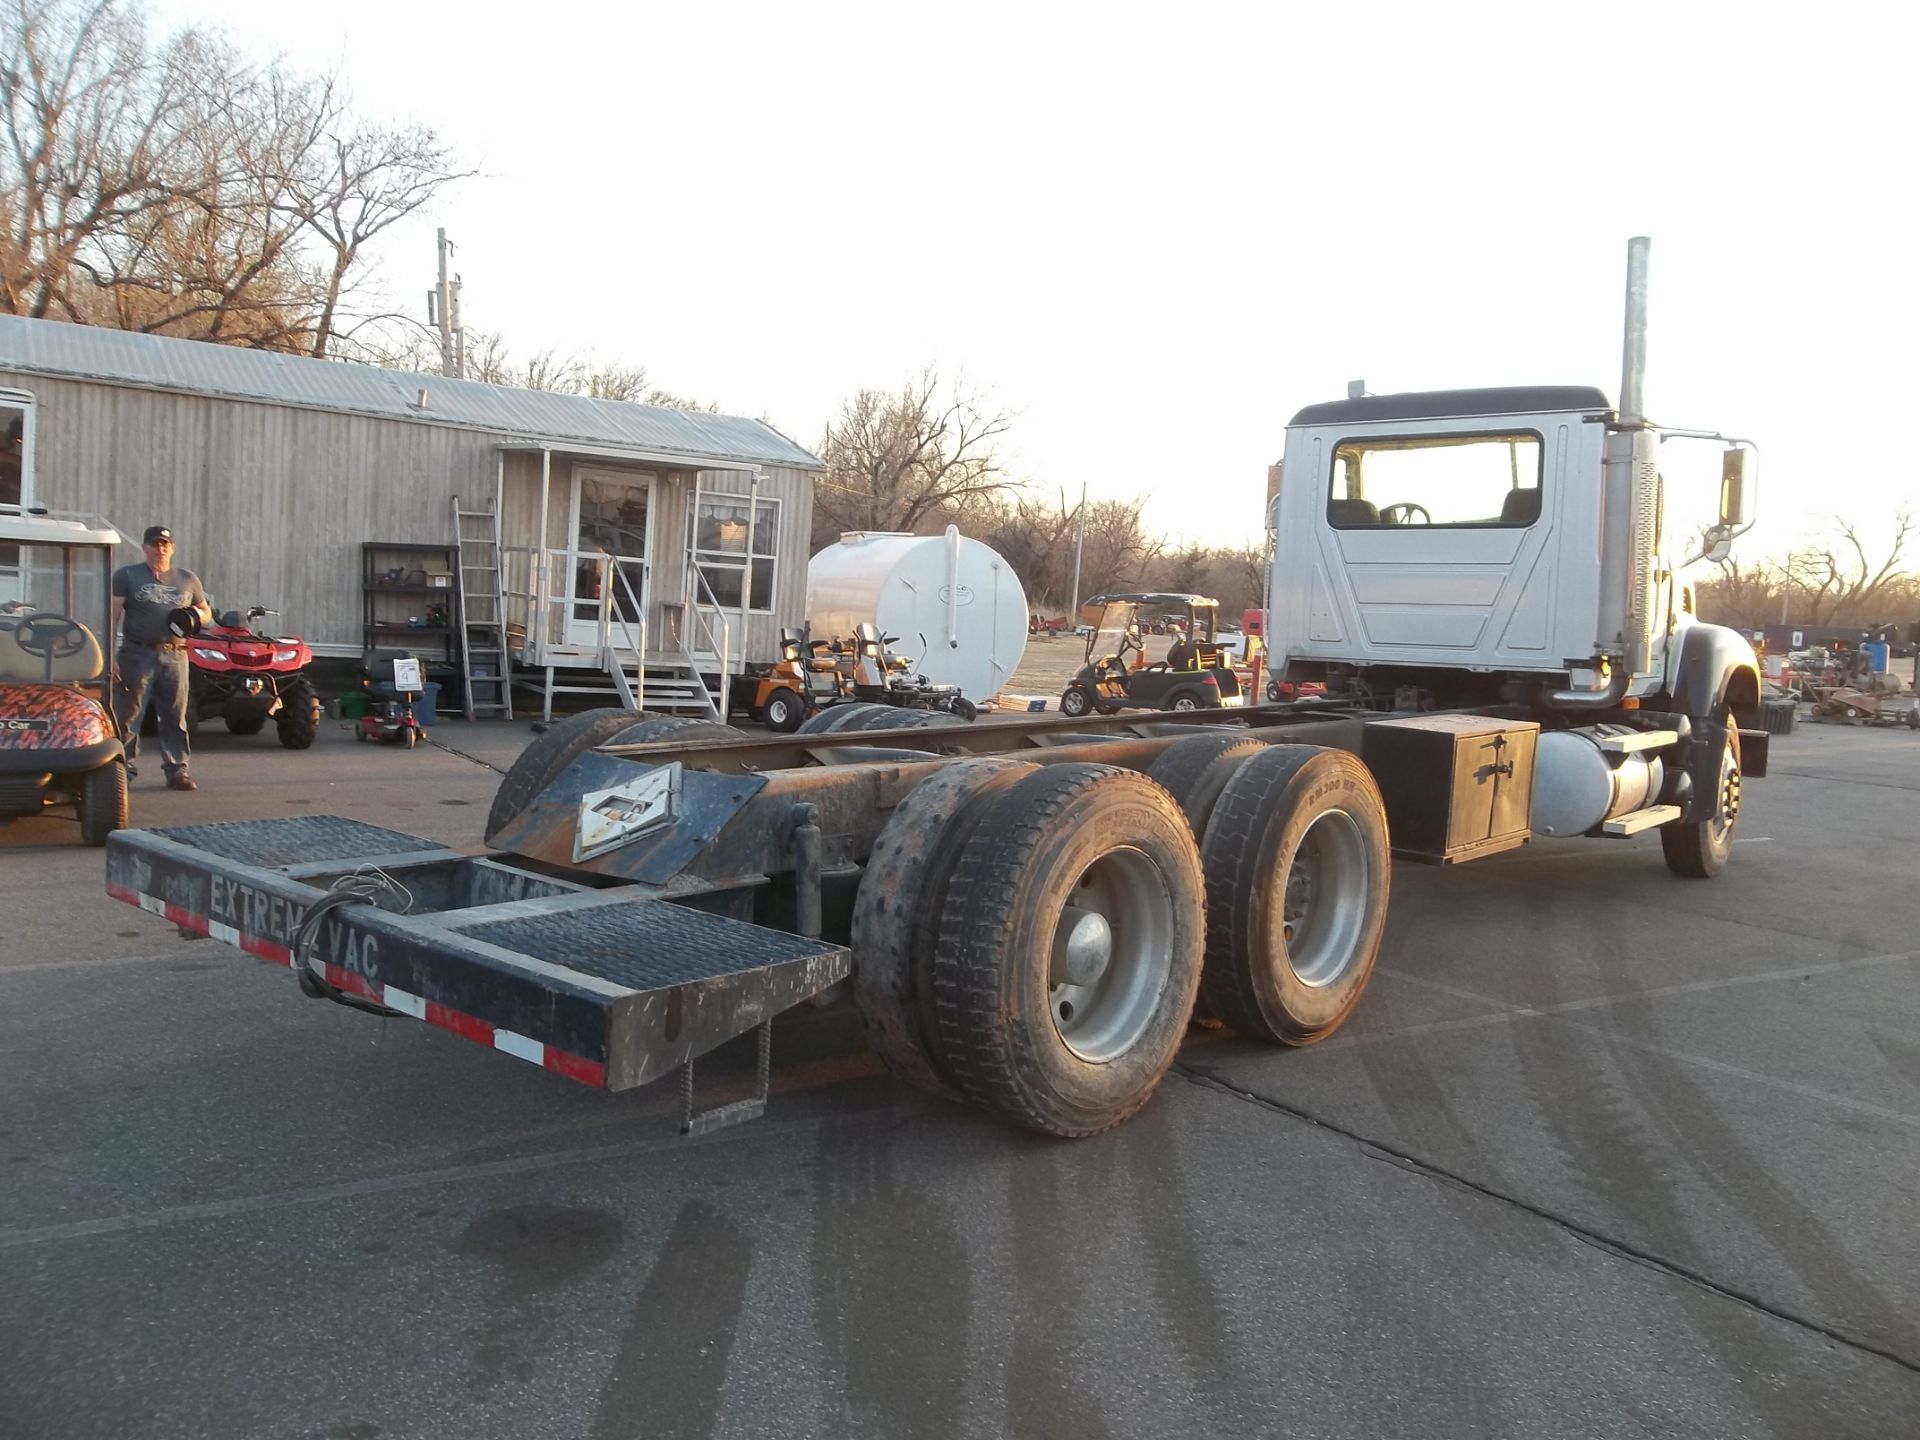 2008 Mack CV713 Cab & Chassis Truck, s/n 1m2ag11c08m070709,Mack E7 eng, 8 spd trans, od reads 170544 - Image 4 of 6